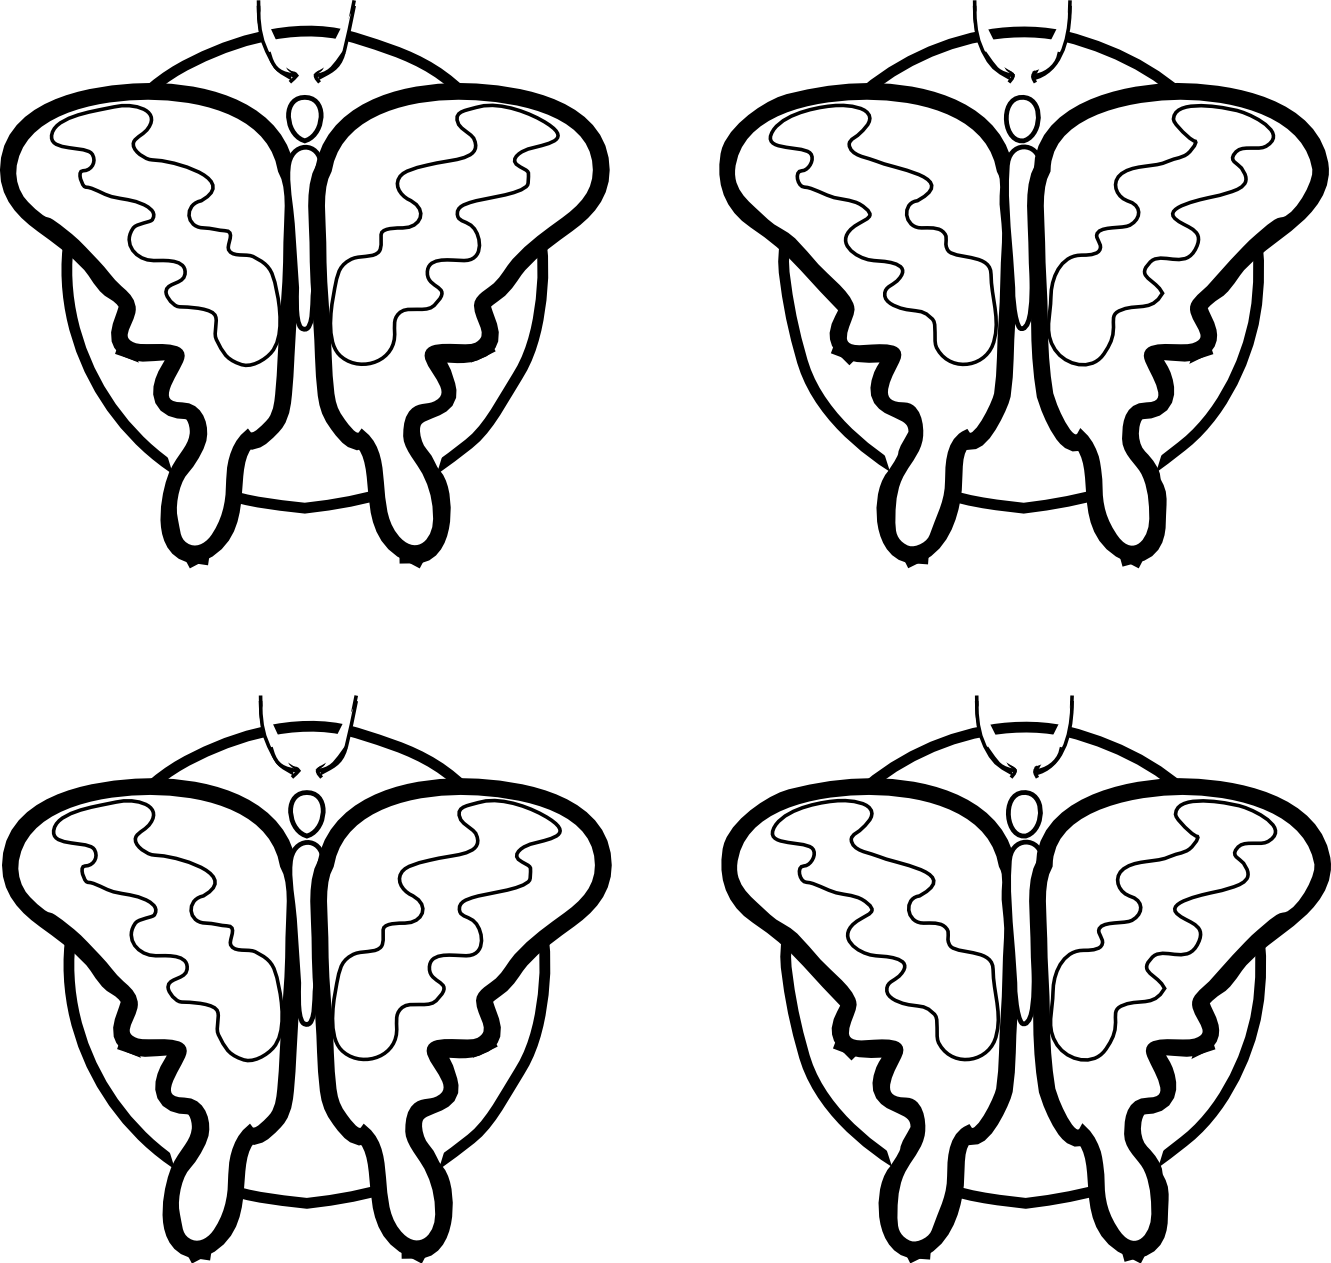 Butterfly black and white black and white butterfly clipart 2 - WikiClipArt